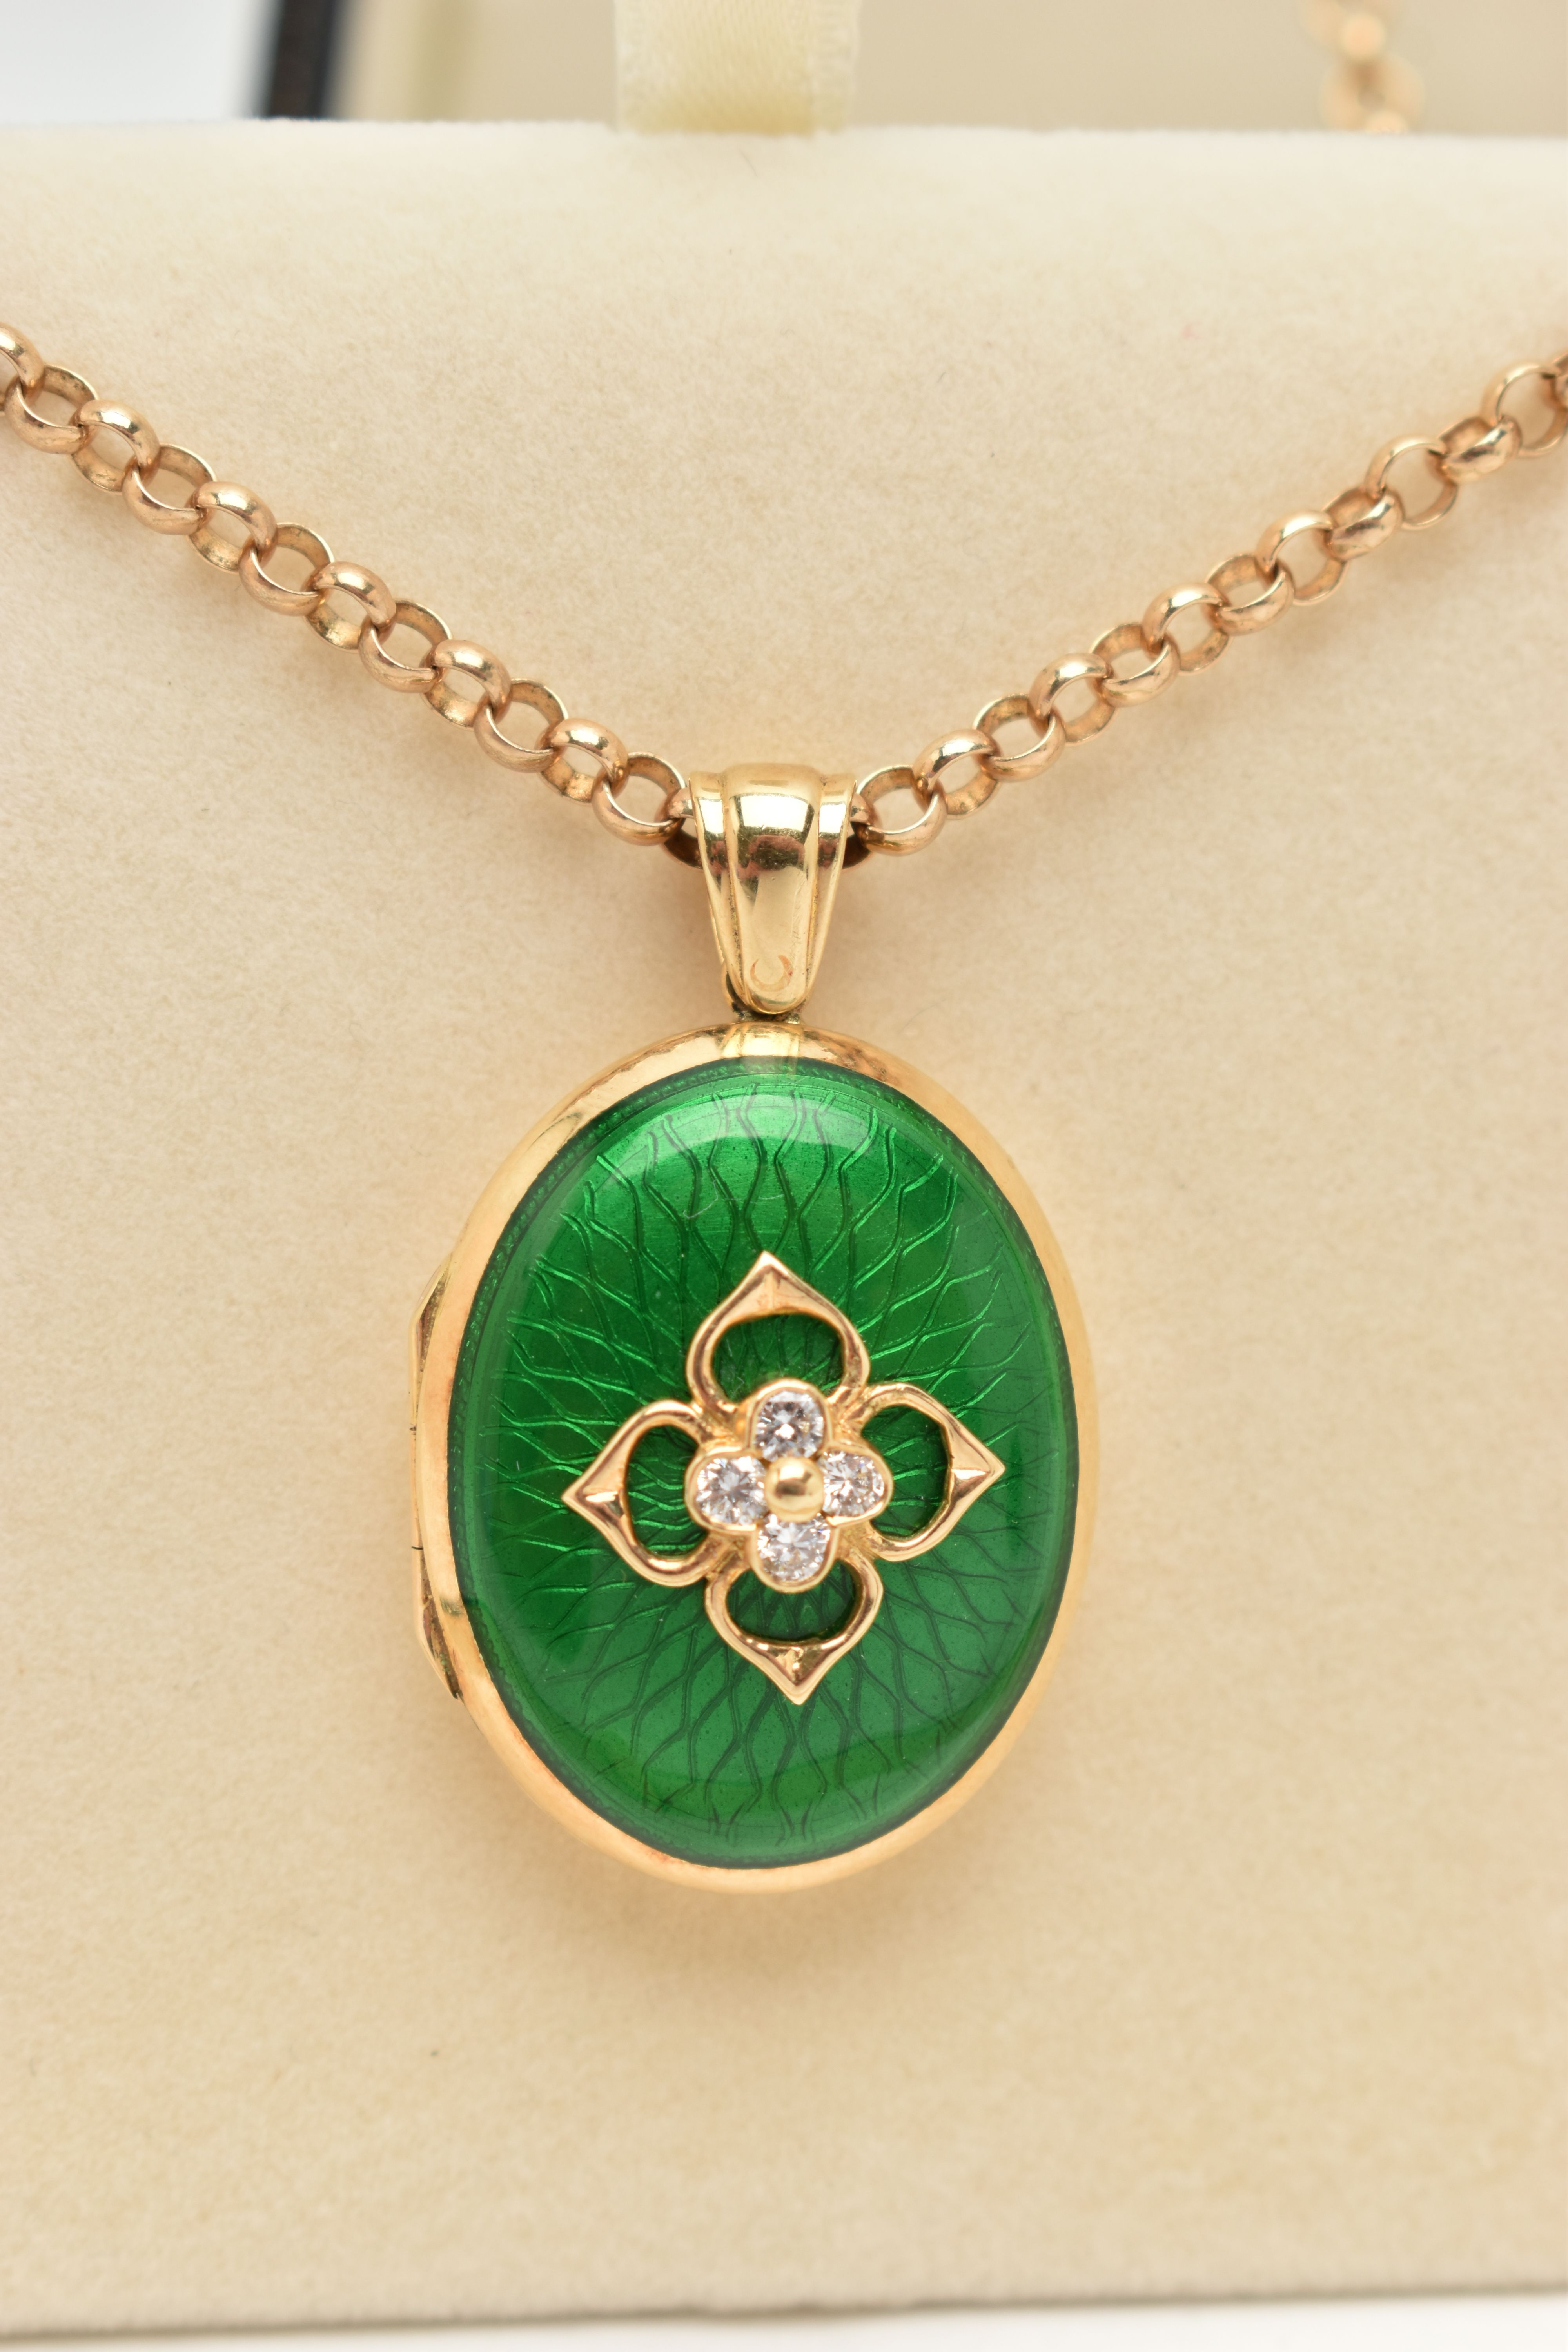 AN 18CT GOLD DIAMOND AND ENAMEL LOCKET, the oval locket with green enamel front, a quatrefoil design - Image 2 of 5